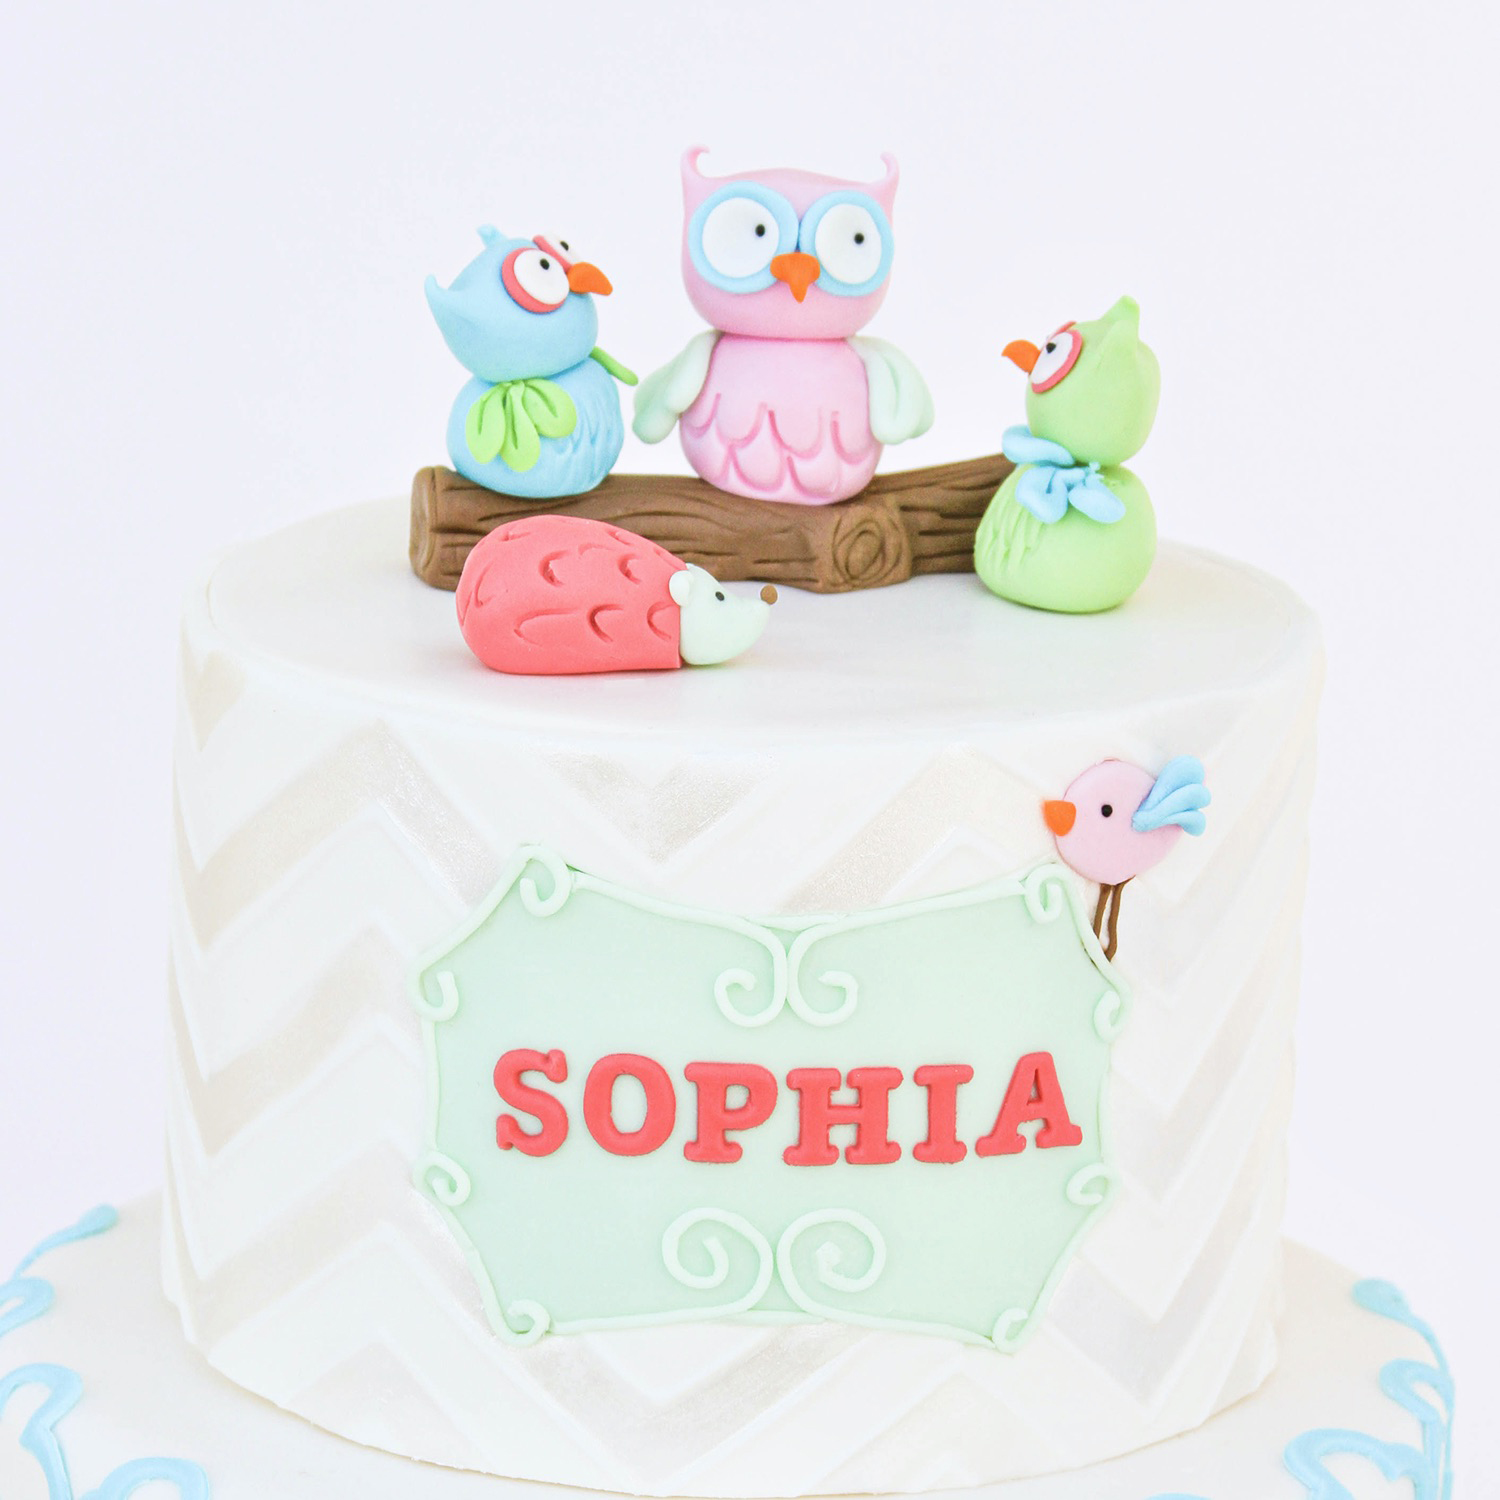 Center stage is the Woodland Owls hand sculted in fondant with arc like feathers. The owls are sitting on a fondant log.